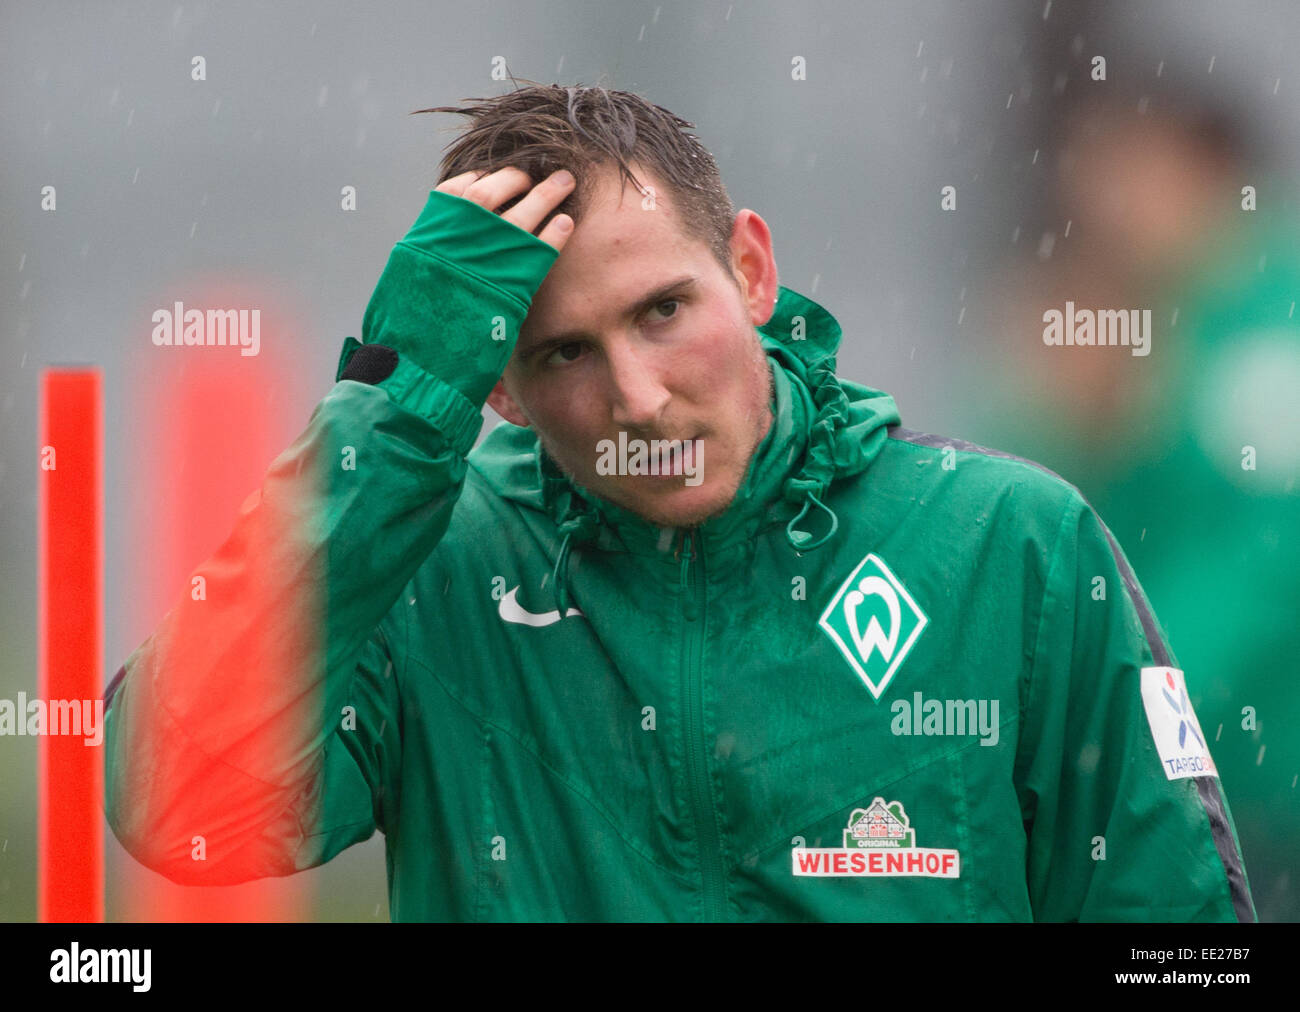 Belek, Turkey. 13th Jan, 2015. Werder Bremen's player Izet Hajrovic wipes the rain from his face during a training session in Belek, Turkey, 13 January 2015. Werder Bremen stays in Belek to prepare for the second half of the German Bundesliga season. Photo: Soeren Stache/dpa/Alamy Live News Stock Photo